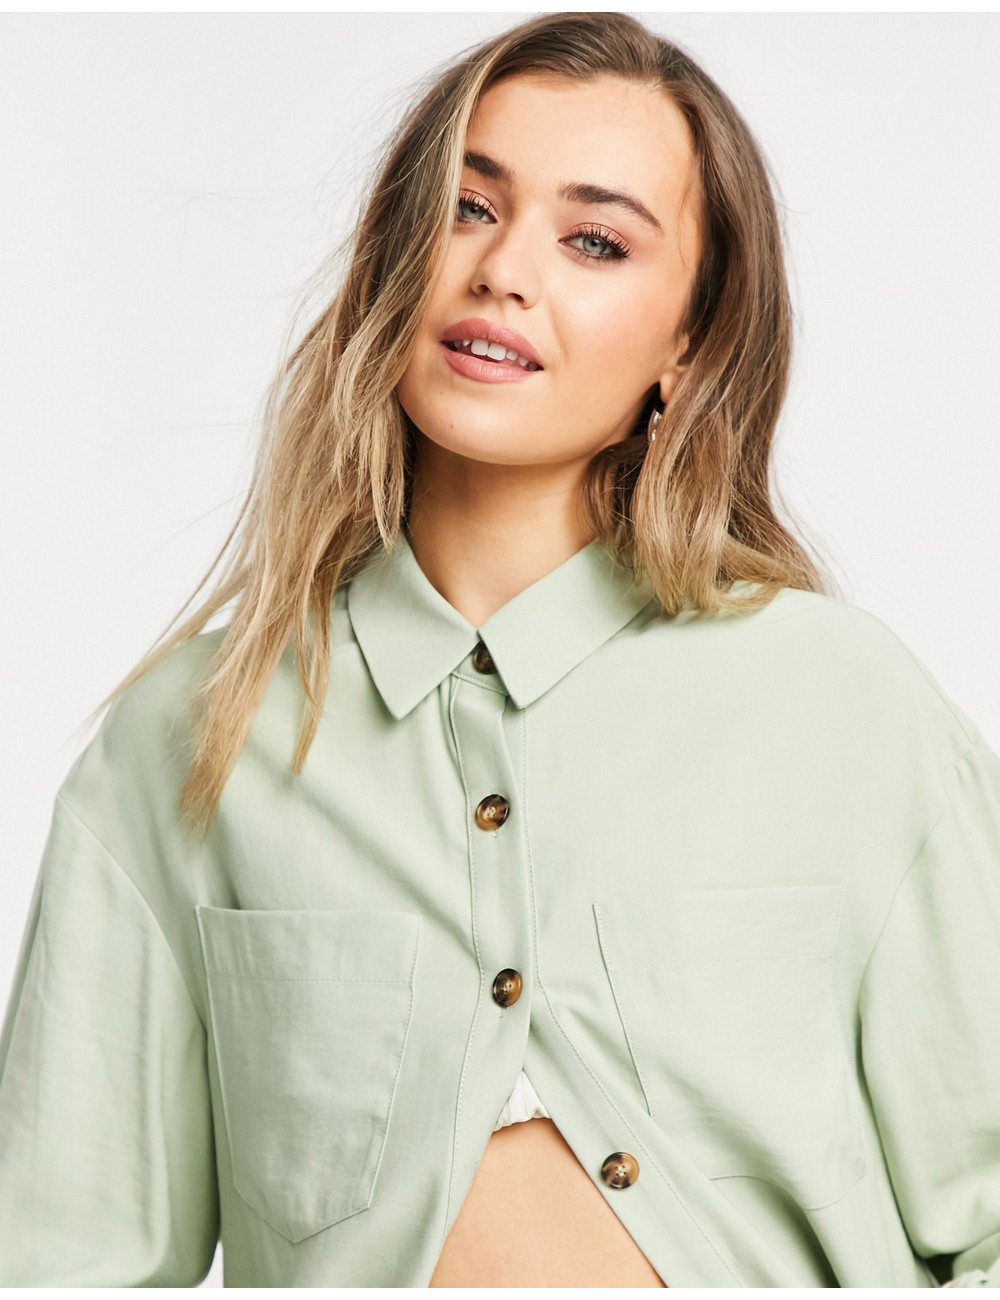 Pieces oversized shirt in sage